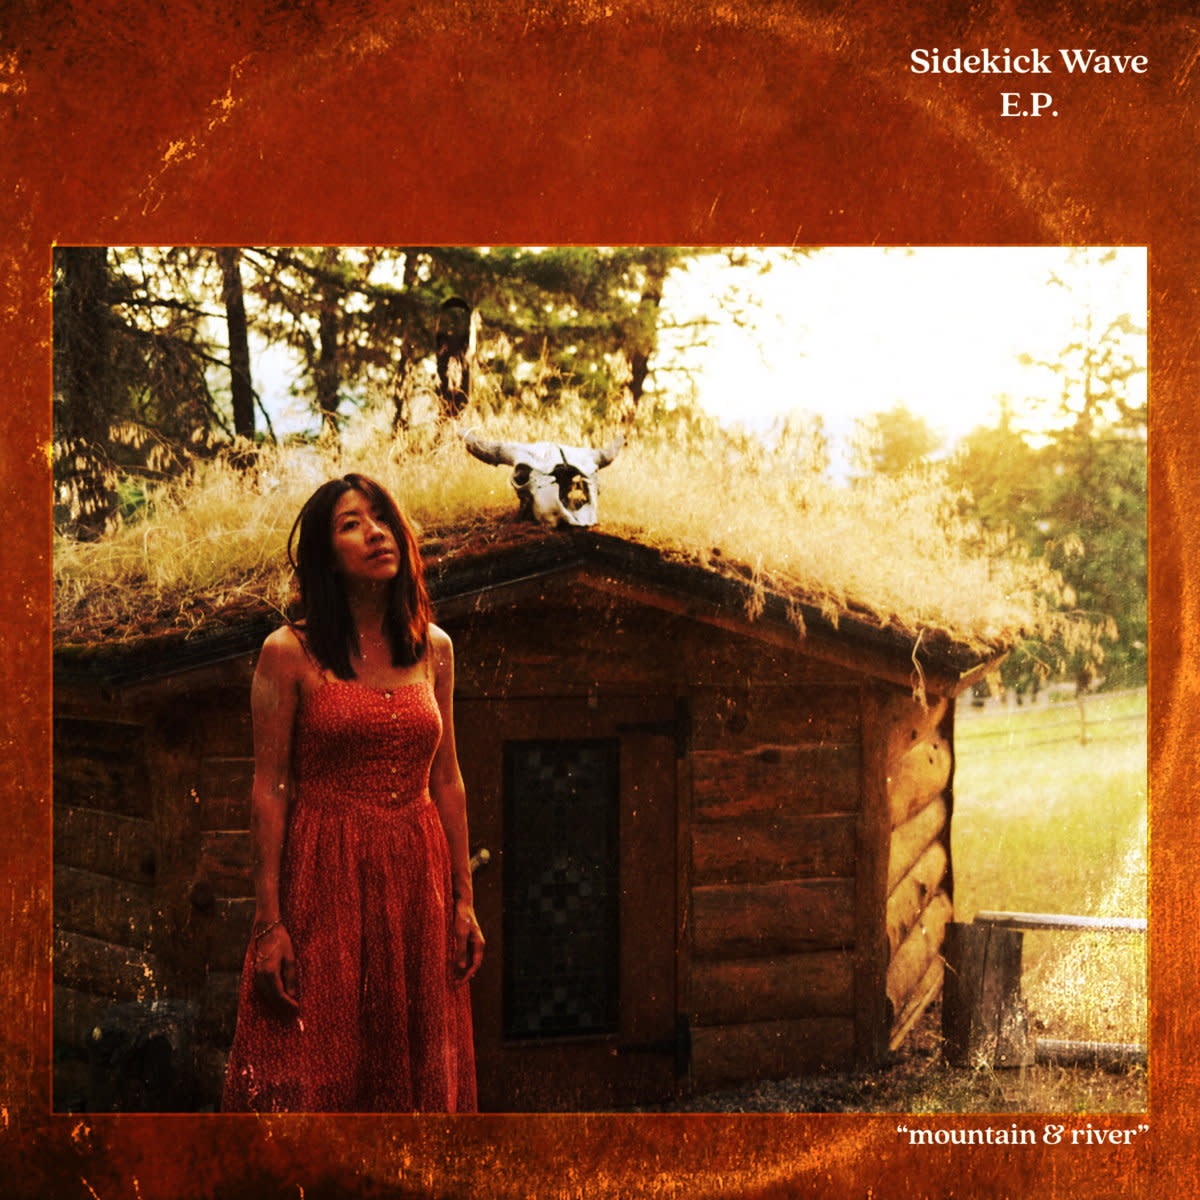 indie-electronic-music-ep-review-mountain-and-river-ep-by-sidekick-wave